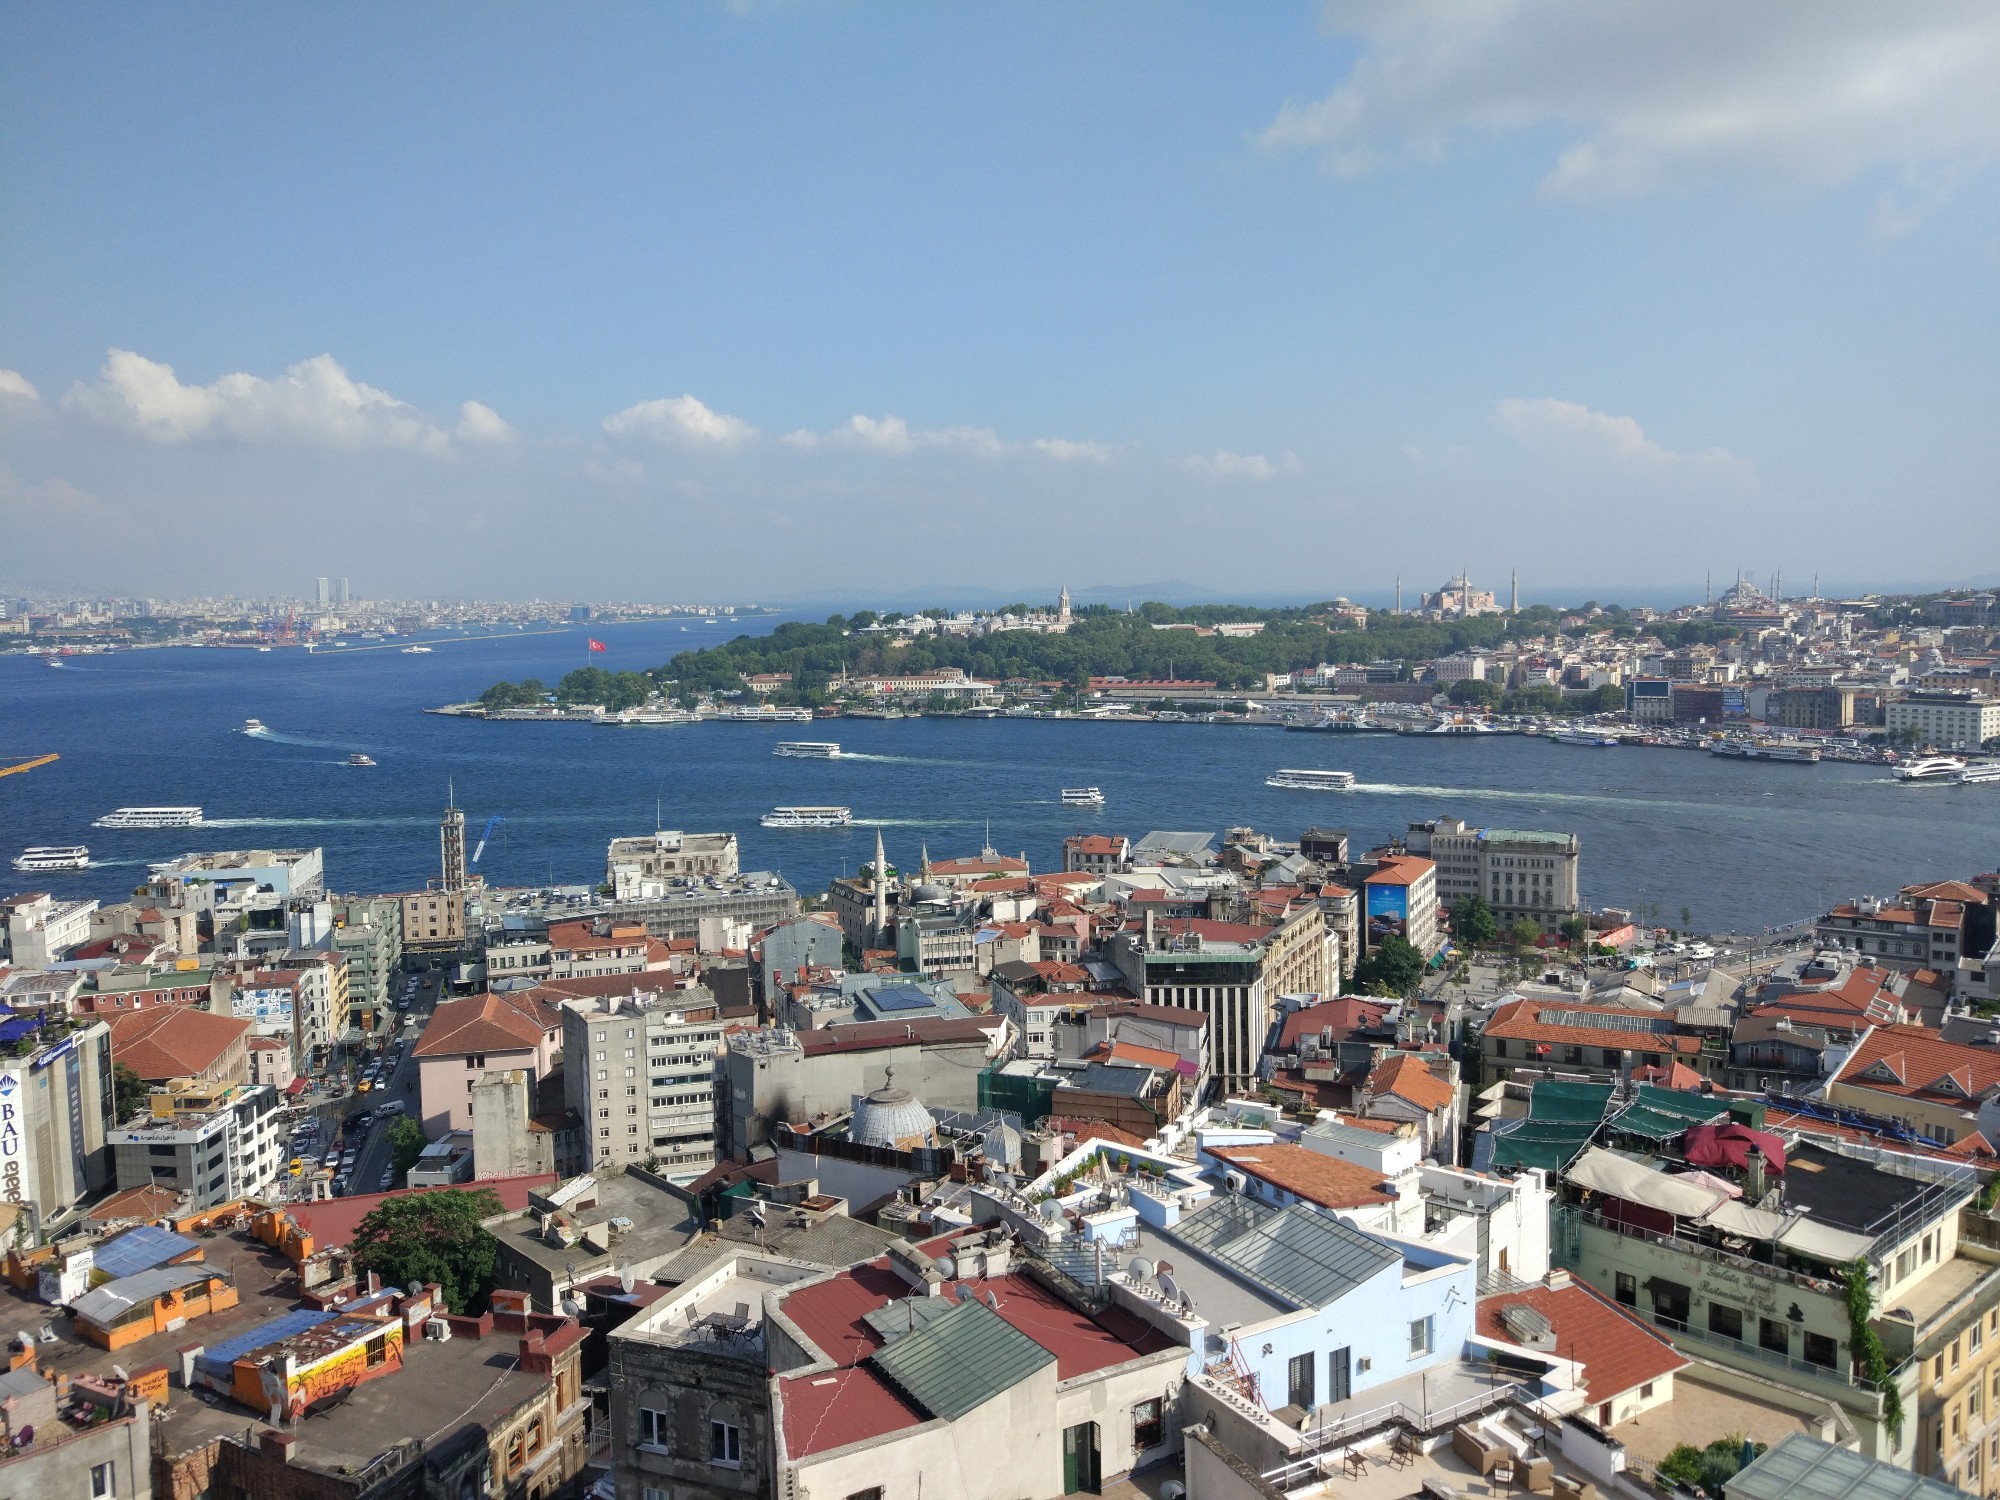 View from Galata Tower, Istambul<br/> <br/>
August 2018